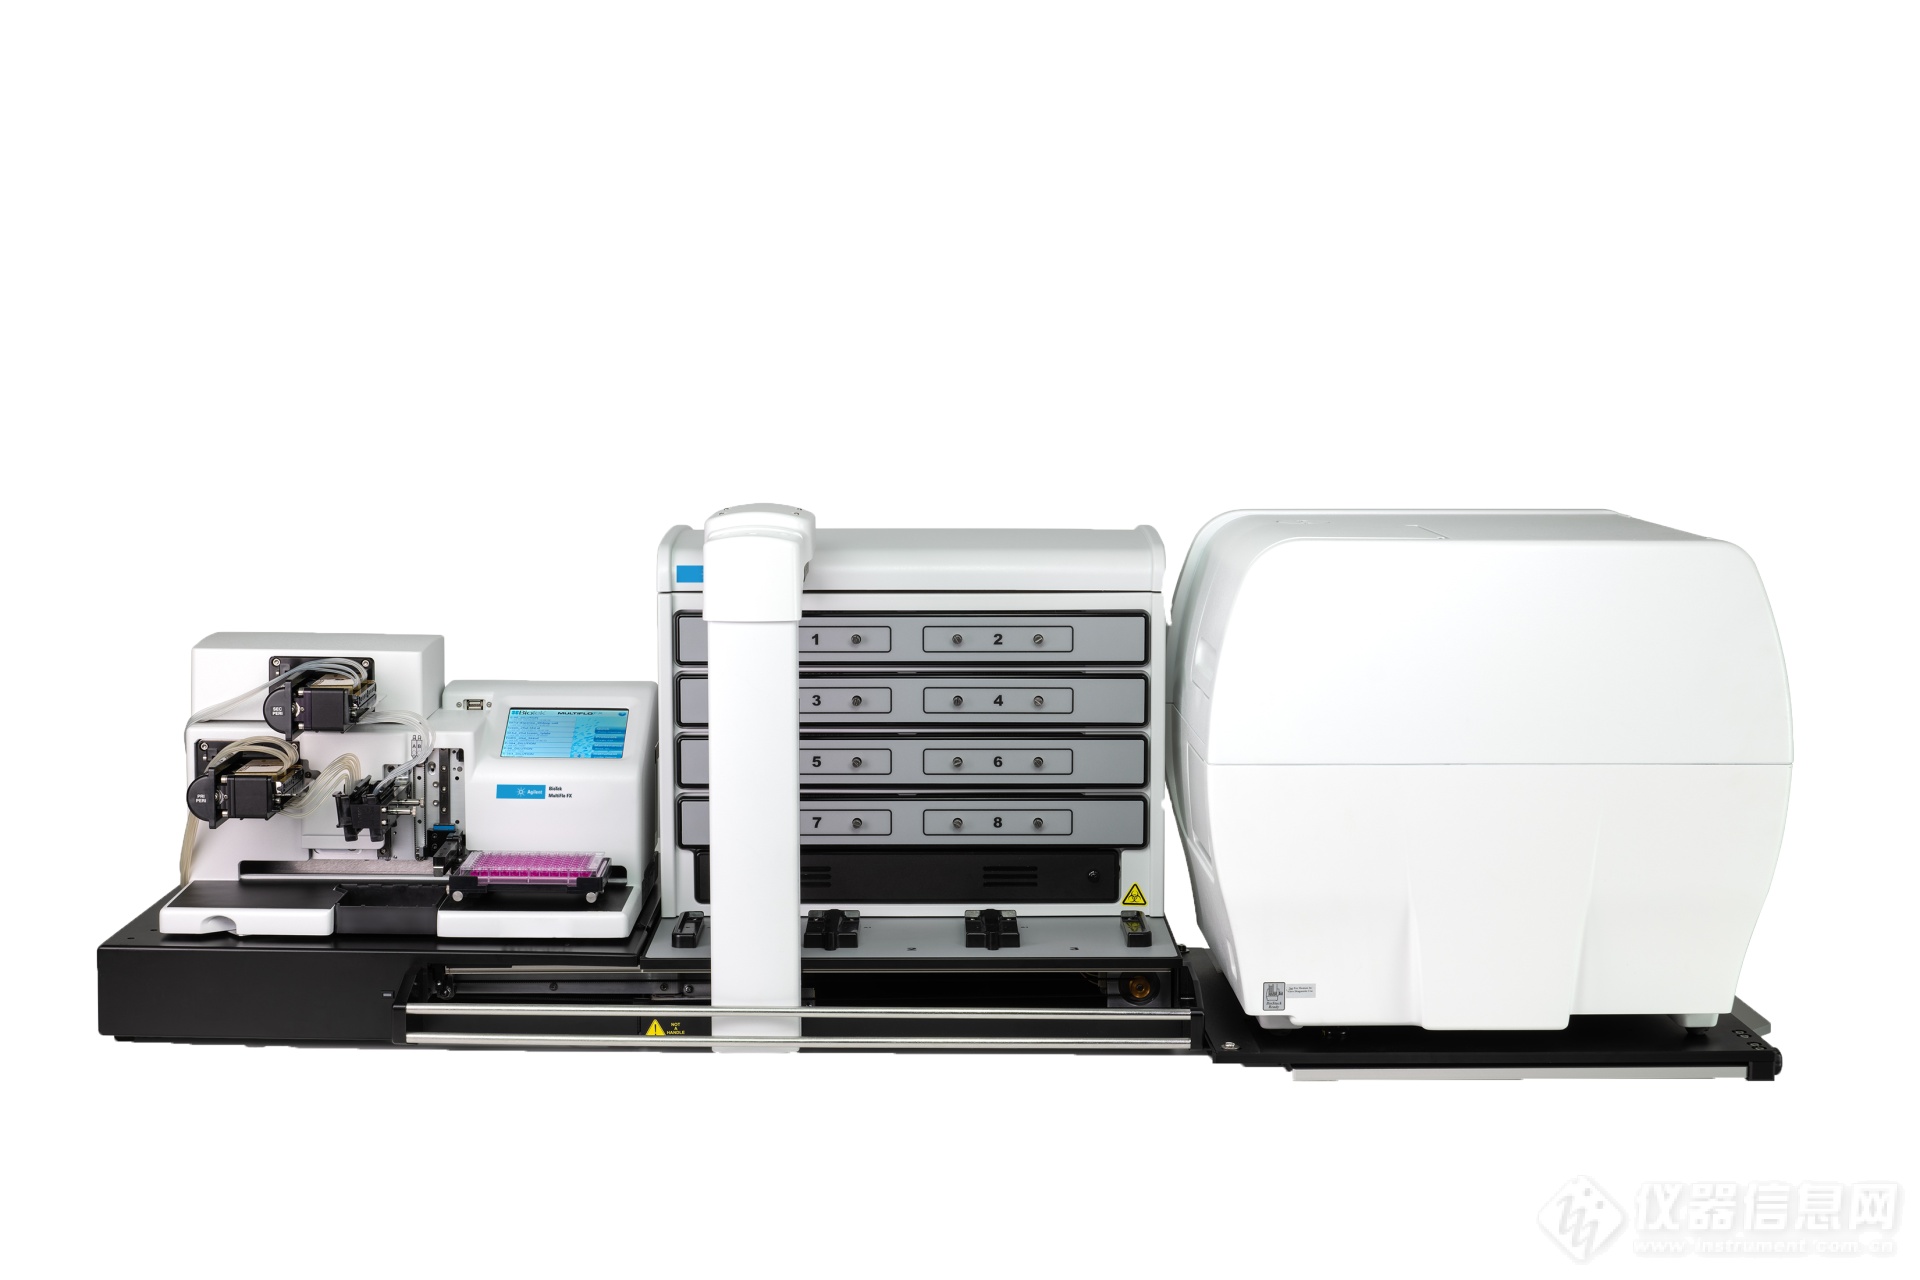 BioSpa with MultiFlo FX and Cytation 5, center facing - Agilent rebranded (1).png